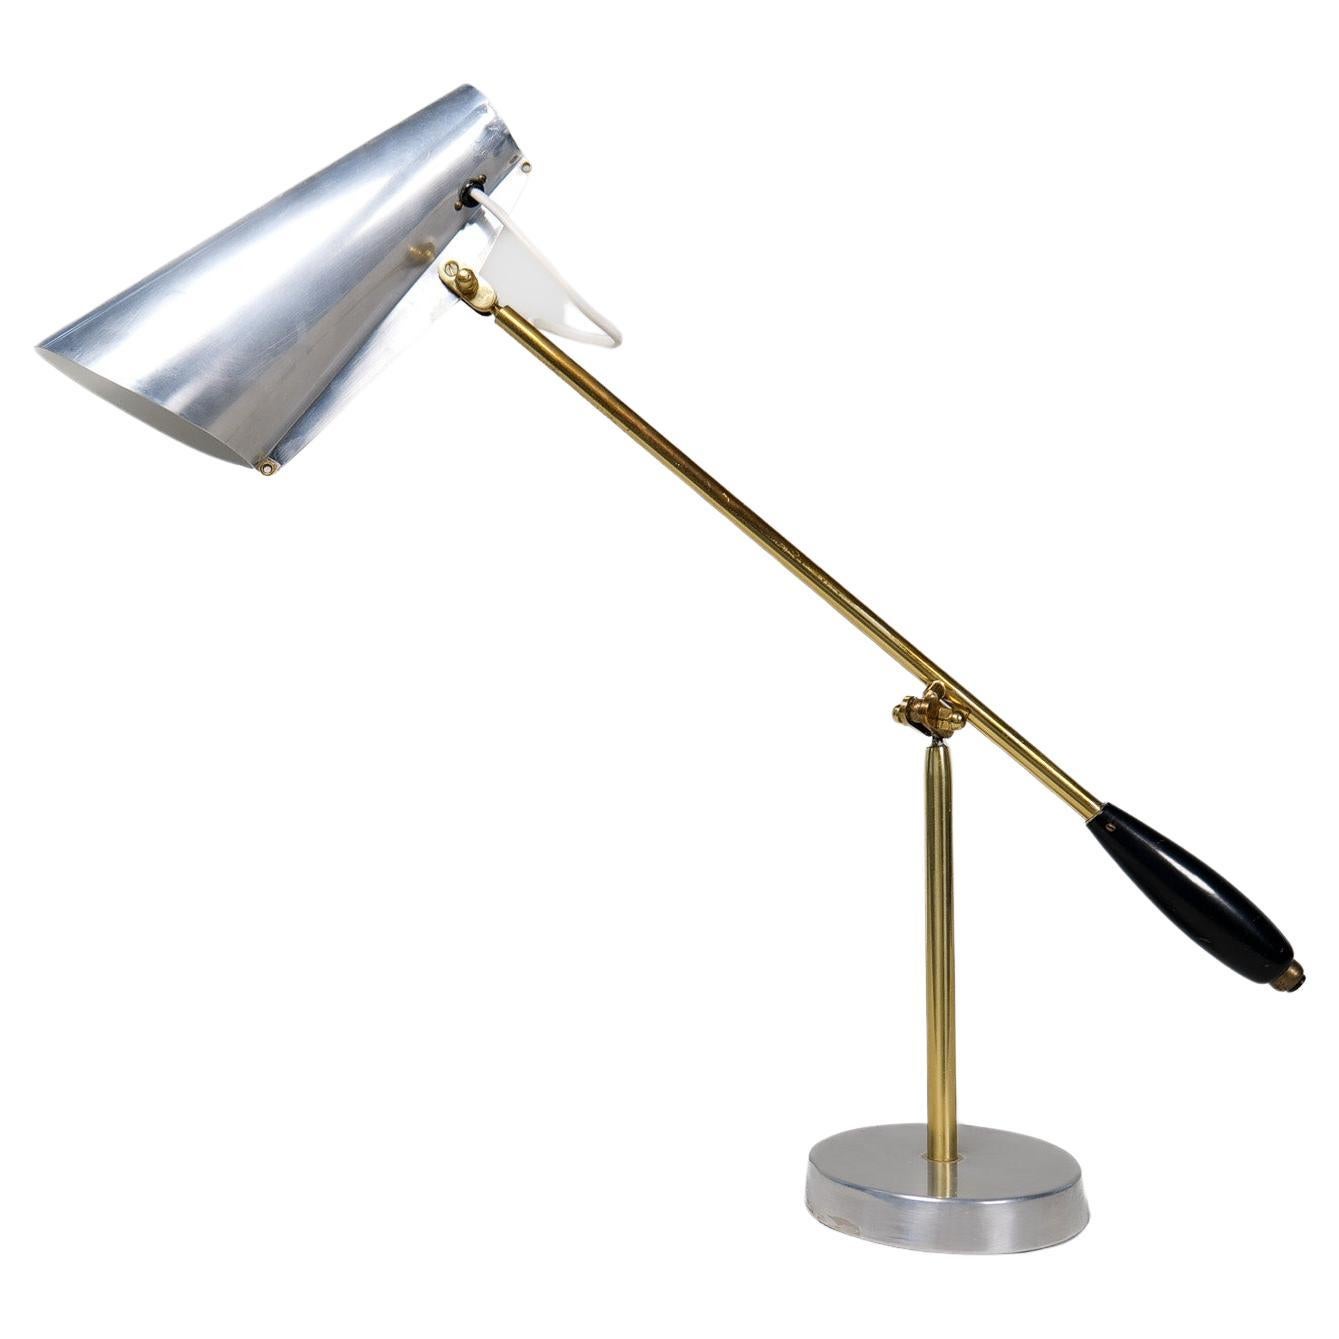 Midcentury Modern 1950s Birger Dahl Table Lamp "Birdy" for Sonnico Norway For Sale